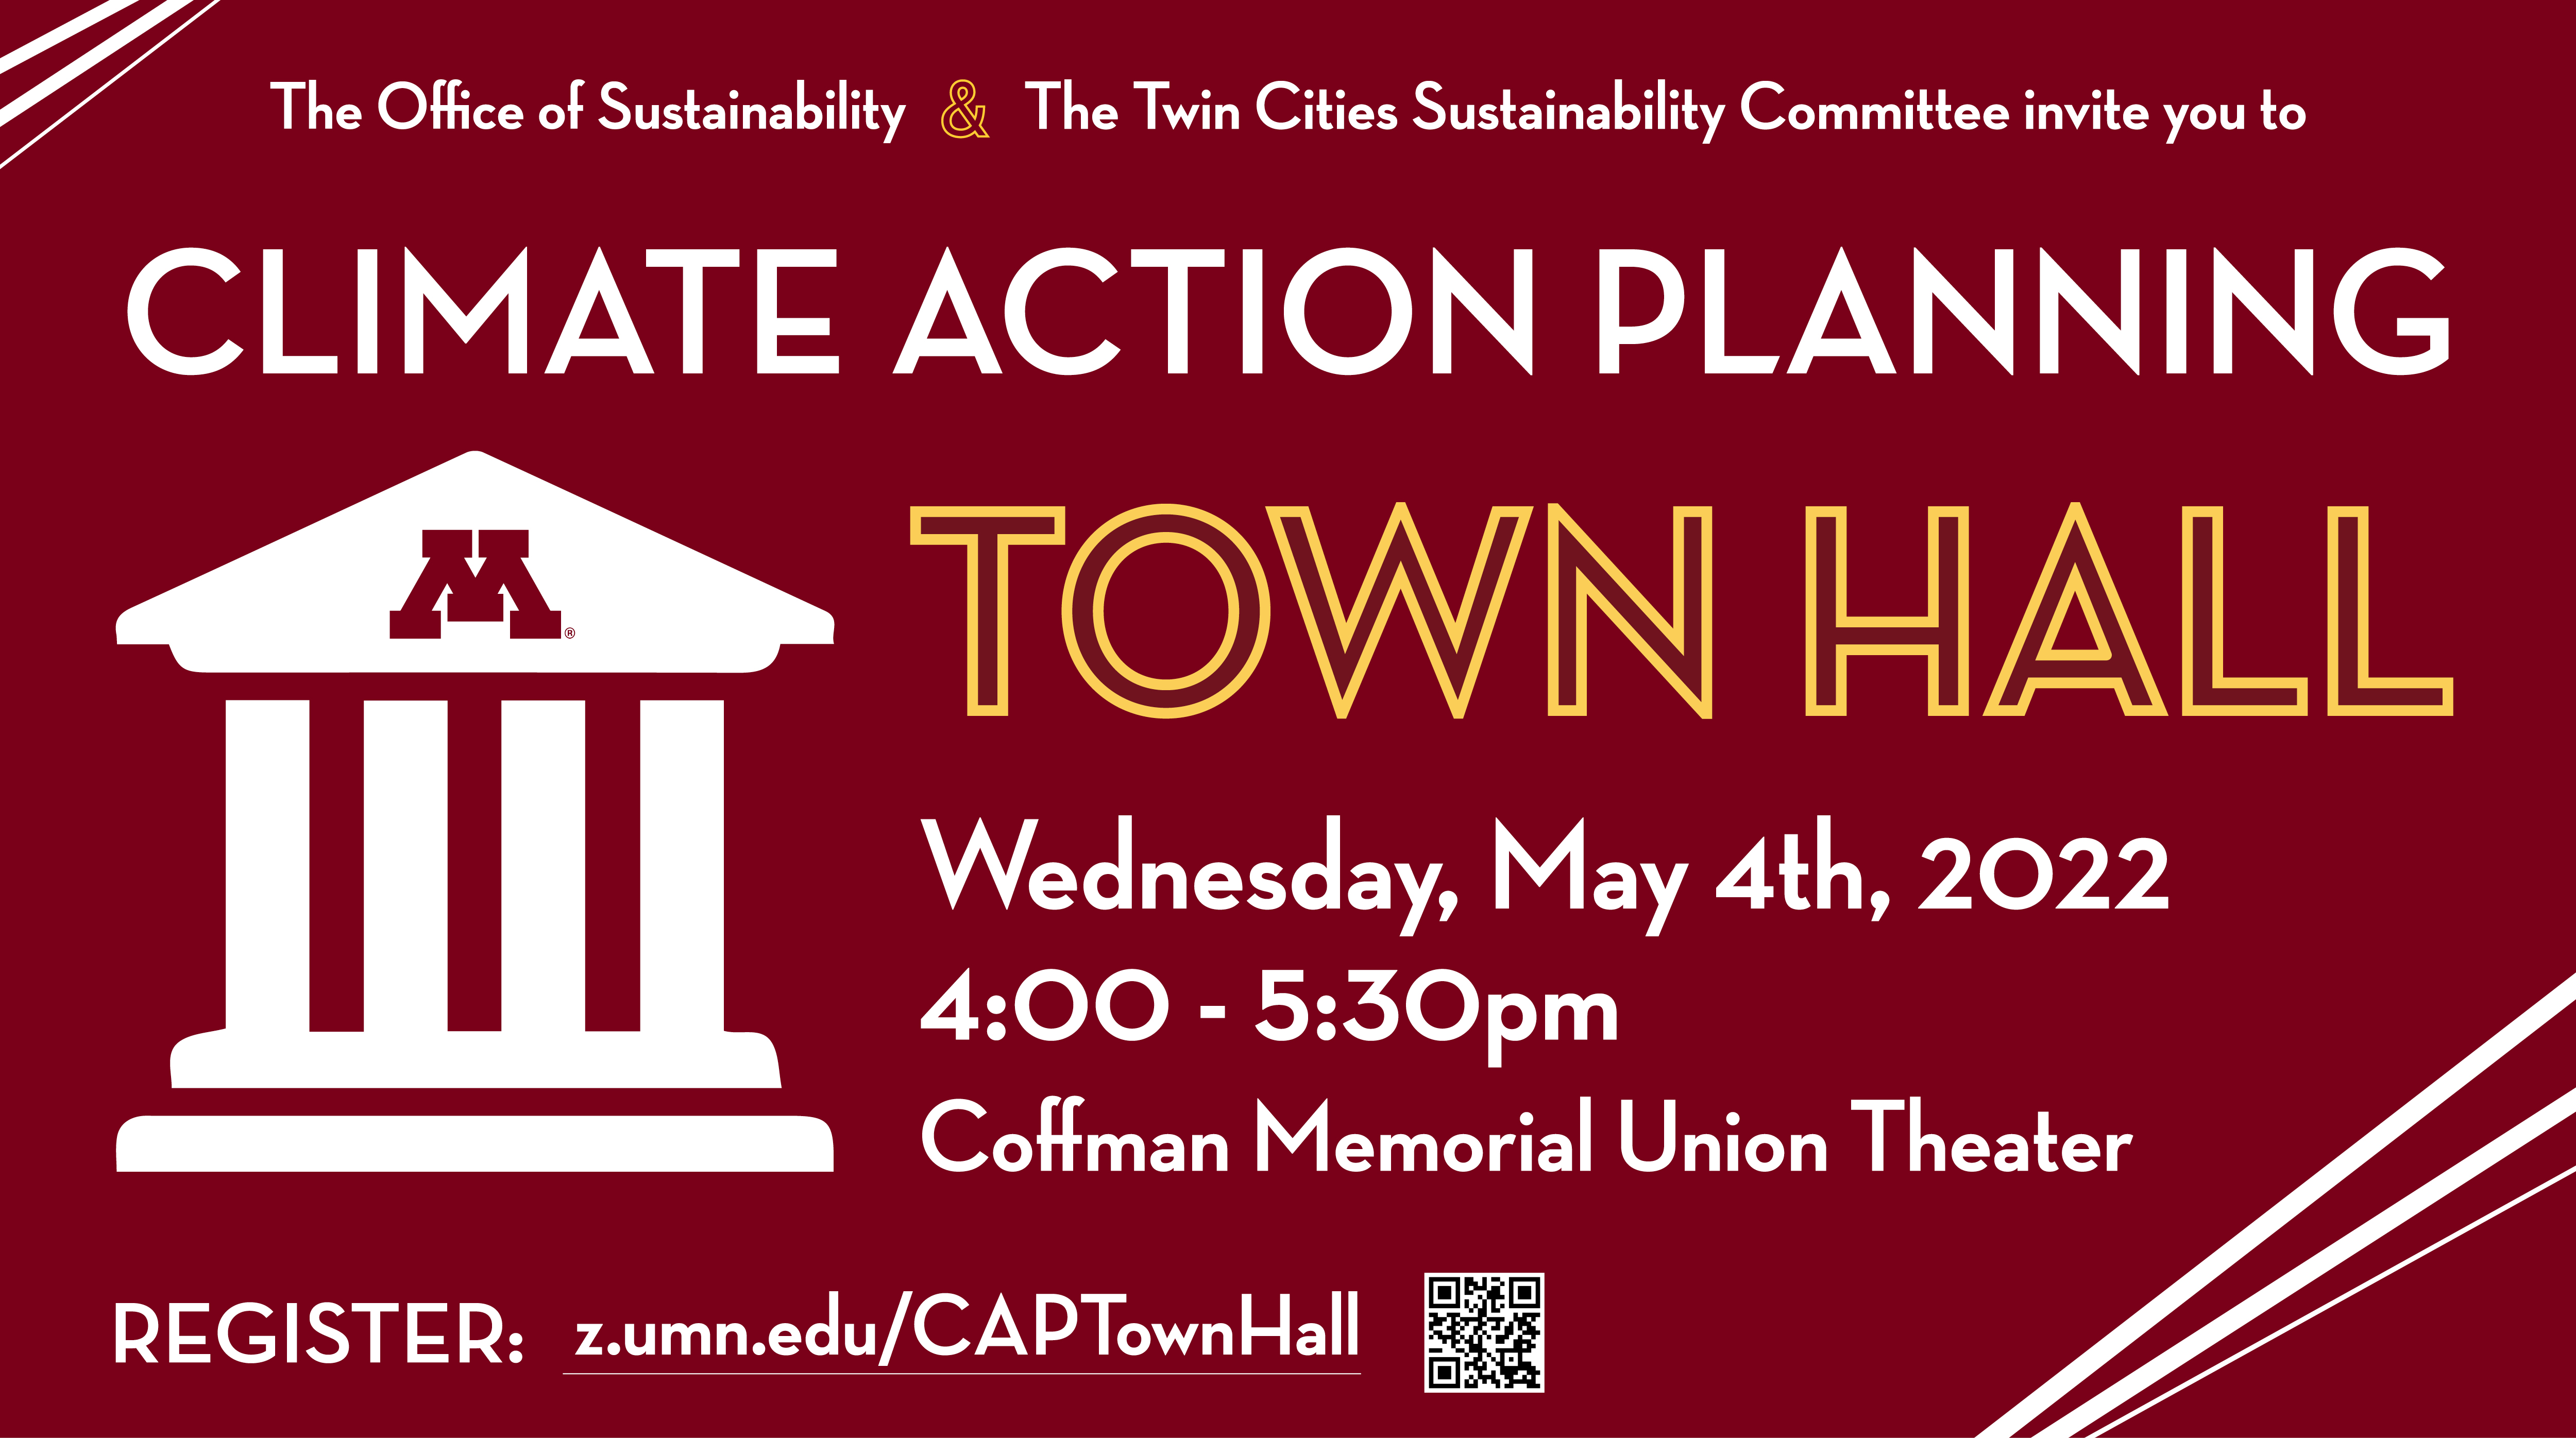 Climate Action Planning Town Hall event banner May 4th 2022 4-5:30pm Coffman Theater